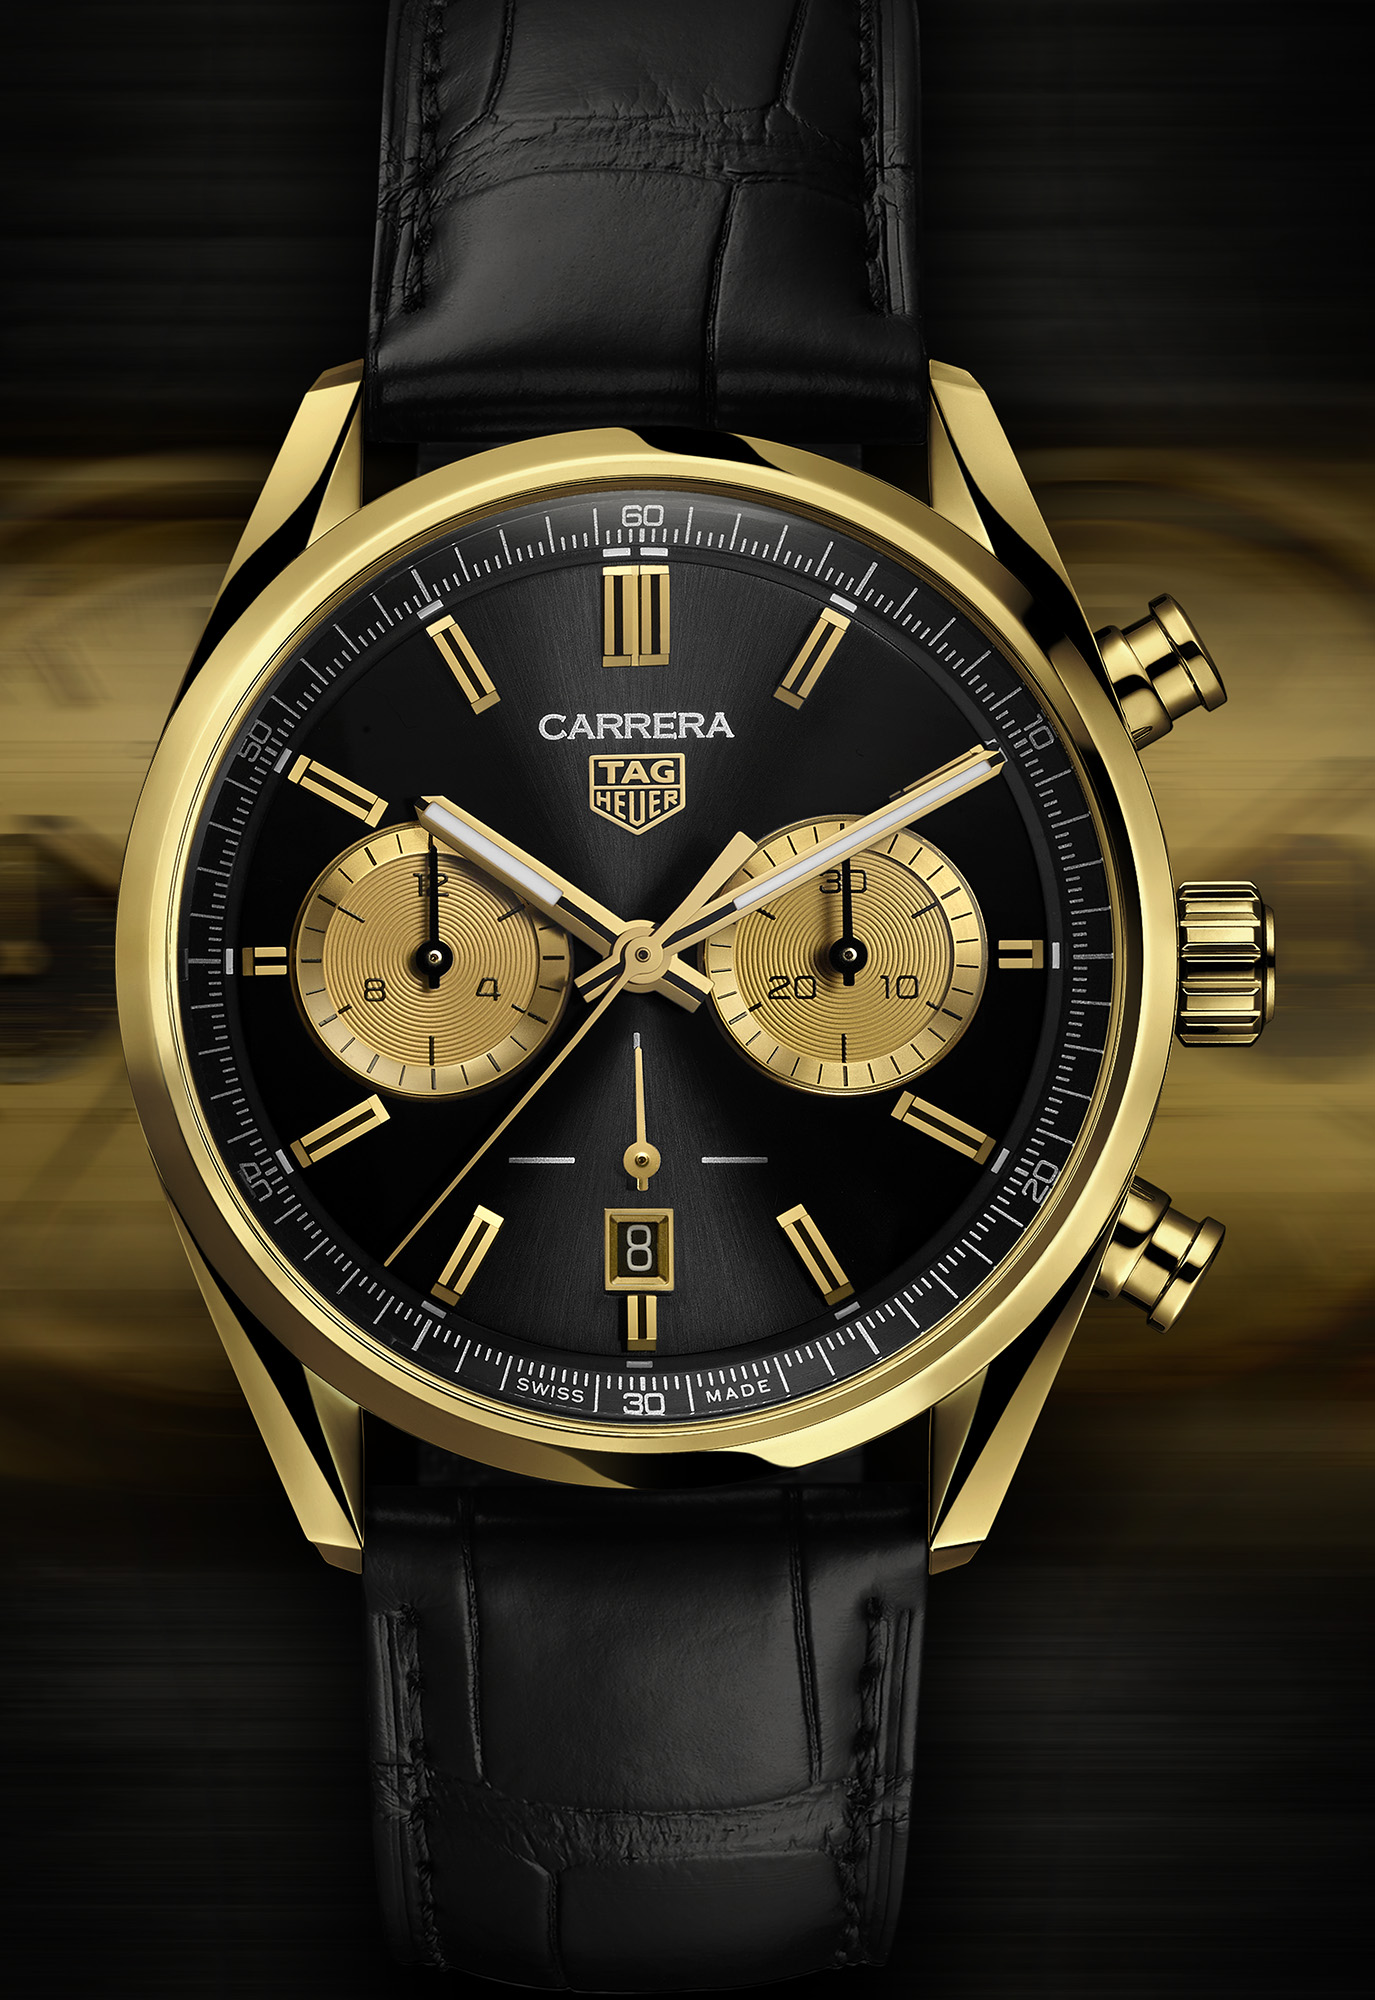 The Luxurious TAG Heuer Carrera Chronograph Watch In Black And Gold